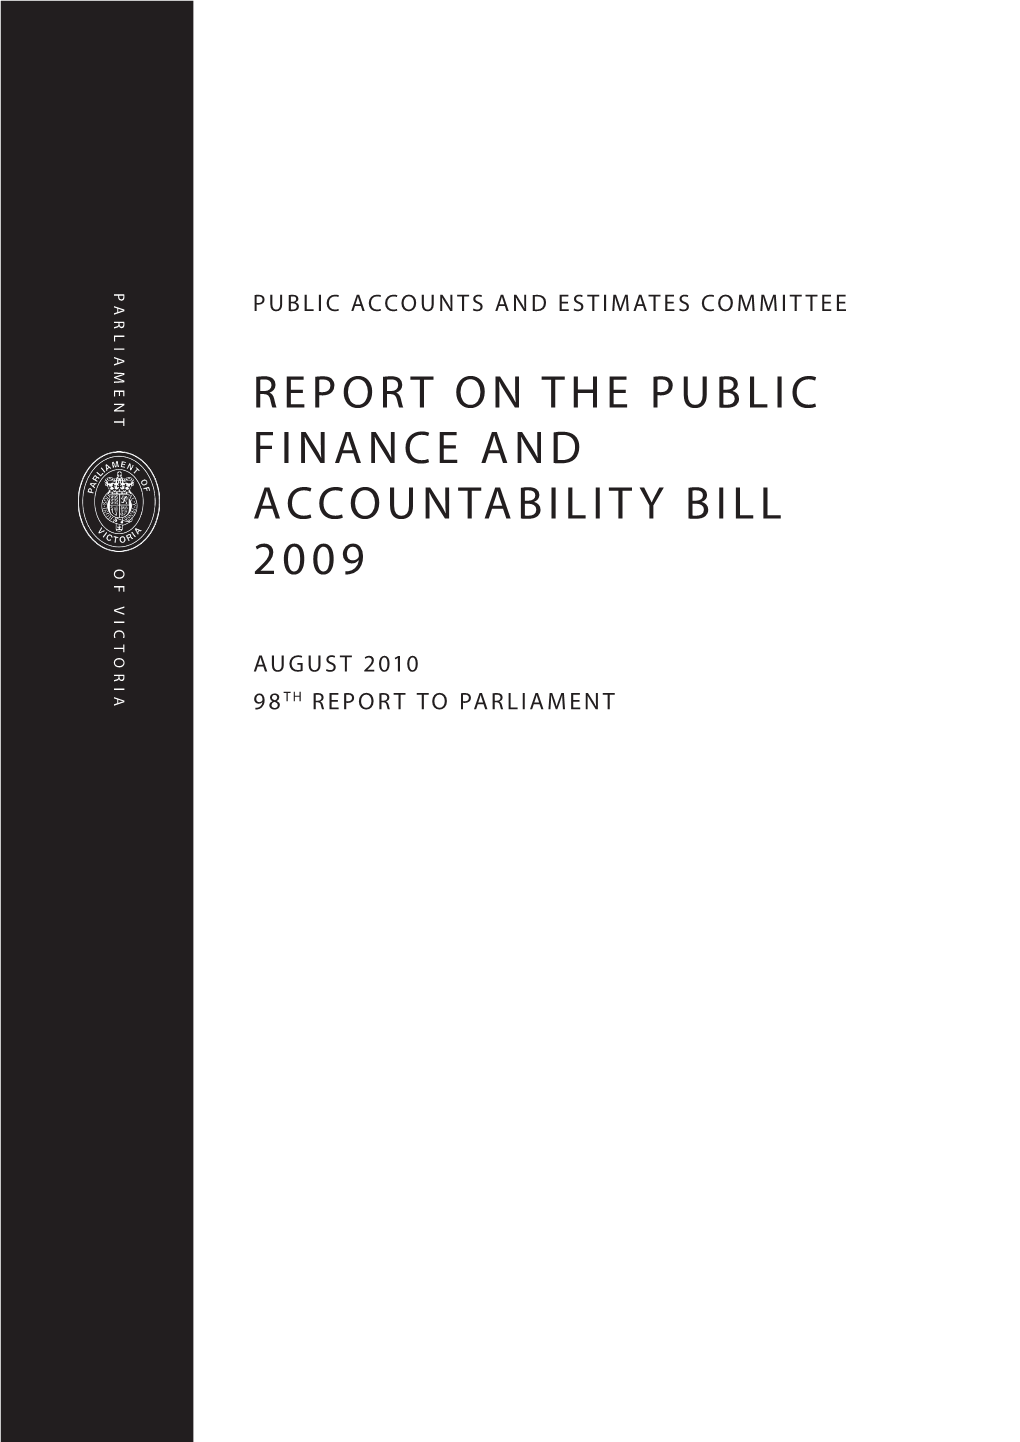 Report on the Public Finance and Accountability Bill